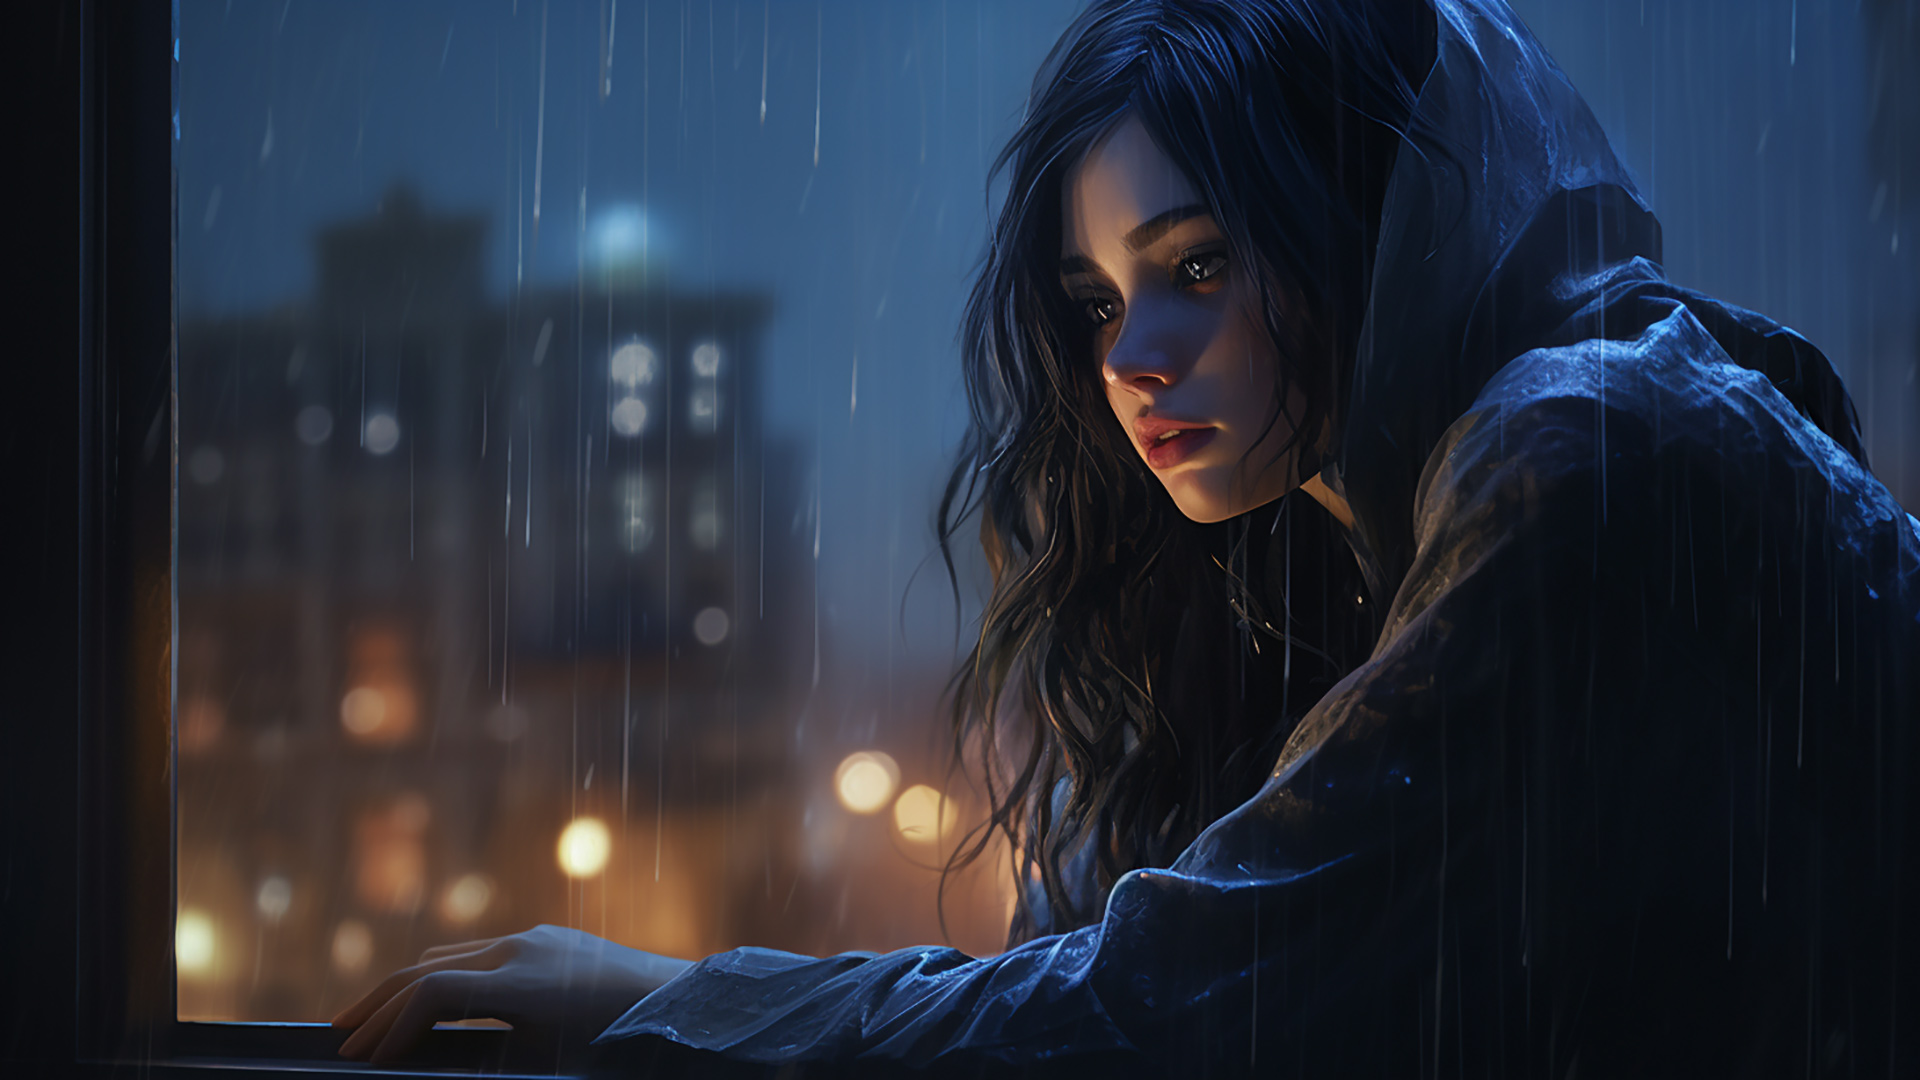 Inspirational rainy window scenes featuring a contemplative girl image